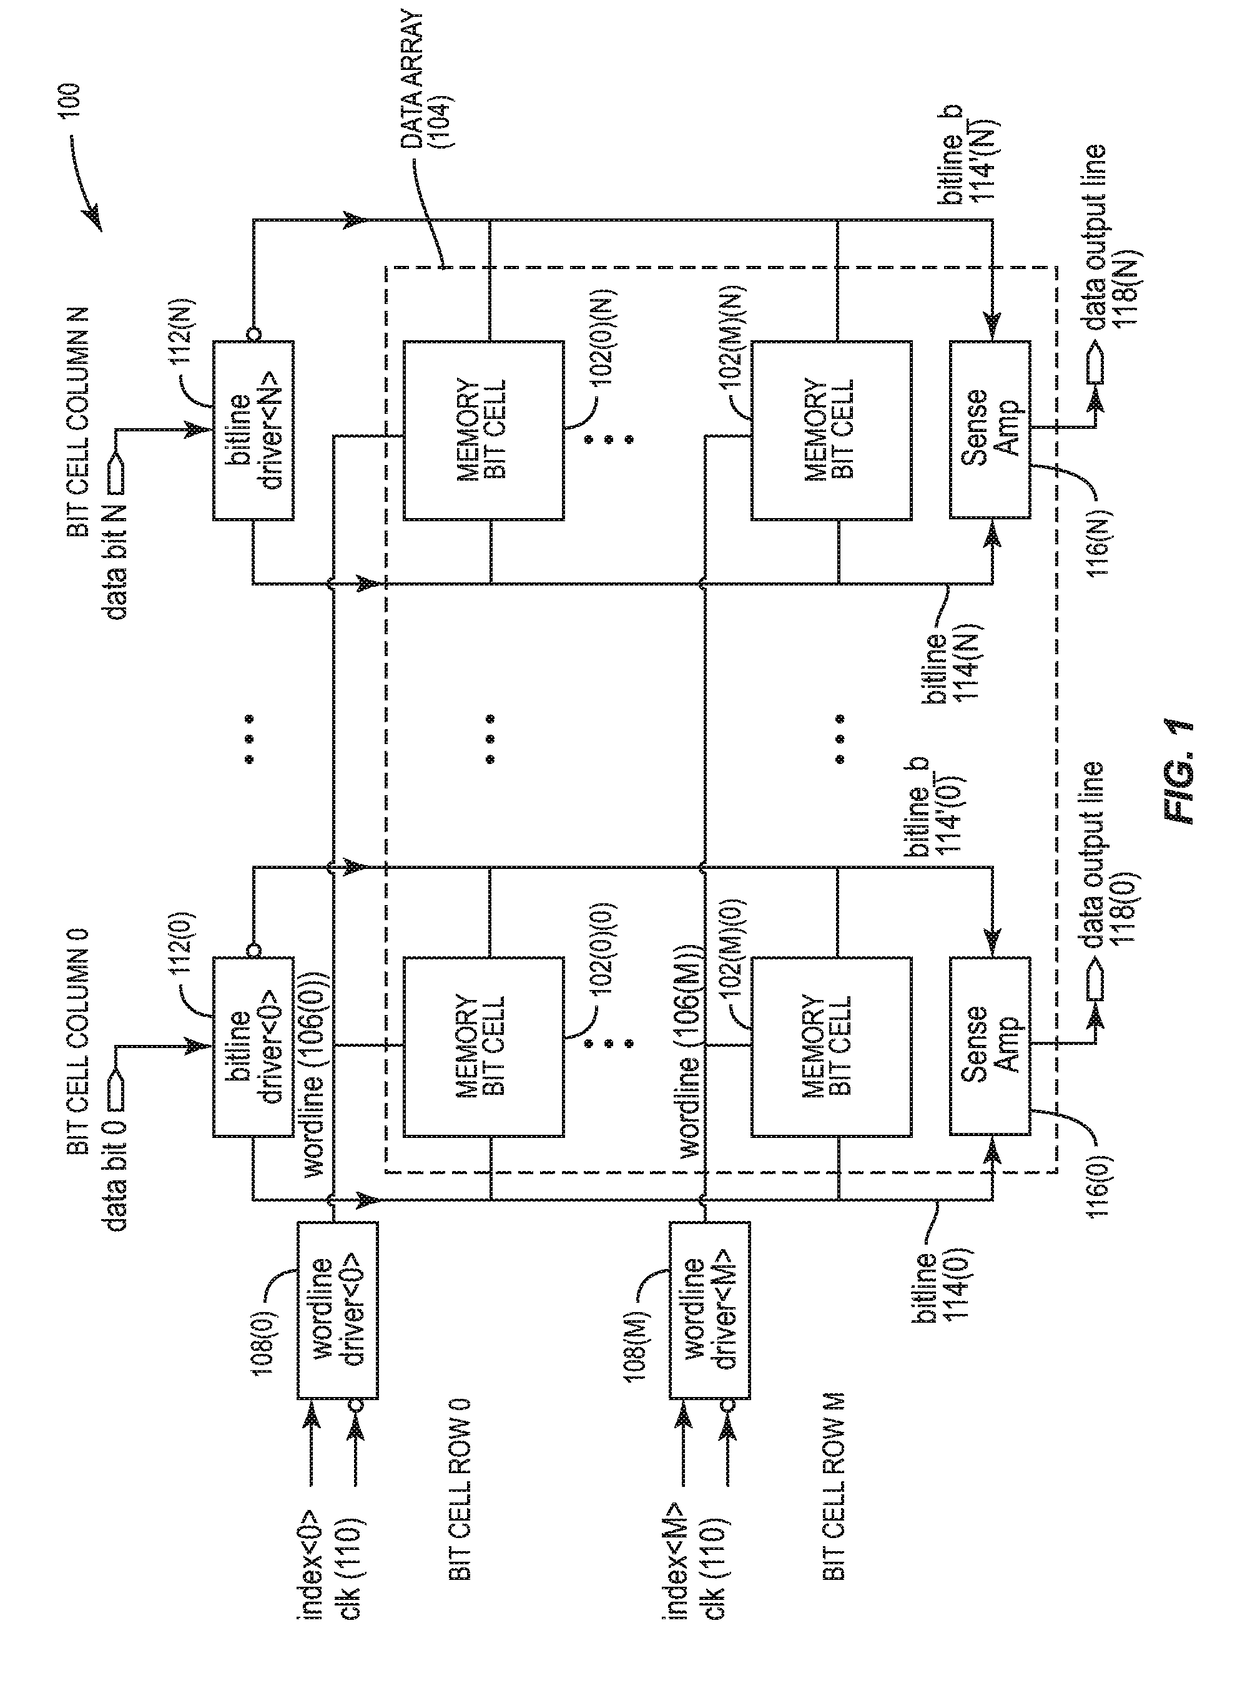 Read-assist circuits for memory bit cells employing a P-type field-effect transistor (PFET) read port(s), and related memory systems and methods